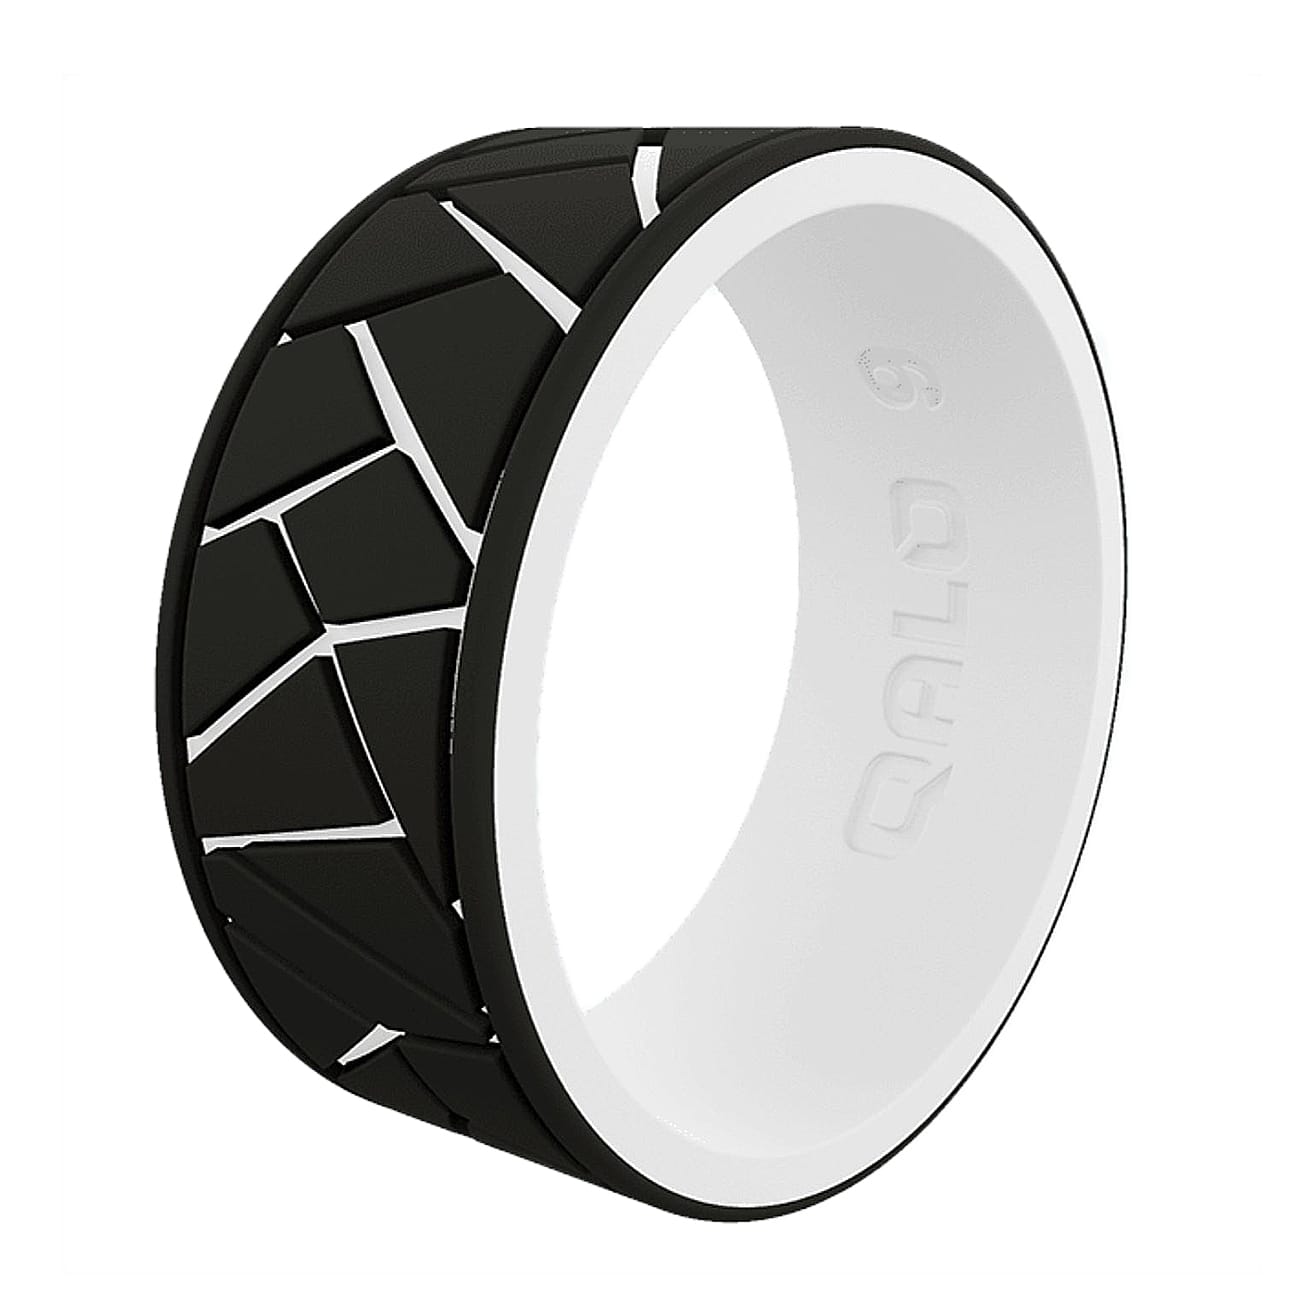 https://euc226bezph.exactdn.com/wp-content/uploads/2019/05/CRJ-180503-qualorings-_0022_mens-strata-dale-and-amy-earnhardt-black-and-white-silicone-ring.jpg?strip=all&lossy=1&resize=1300%2C1300&ssl=1